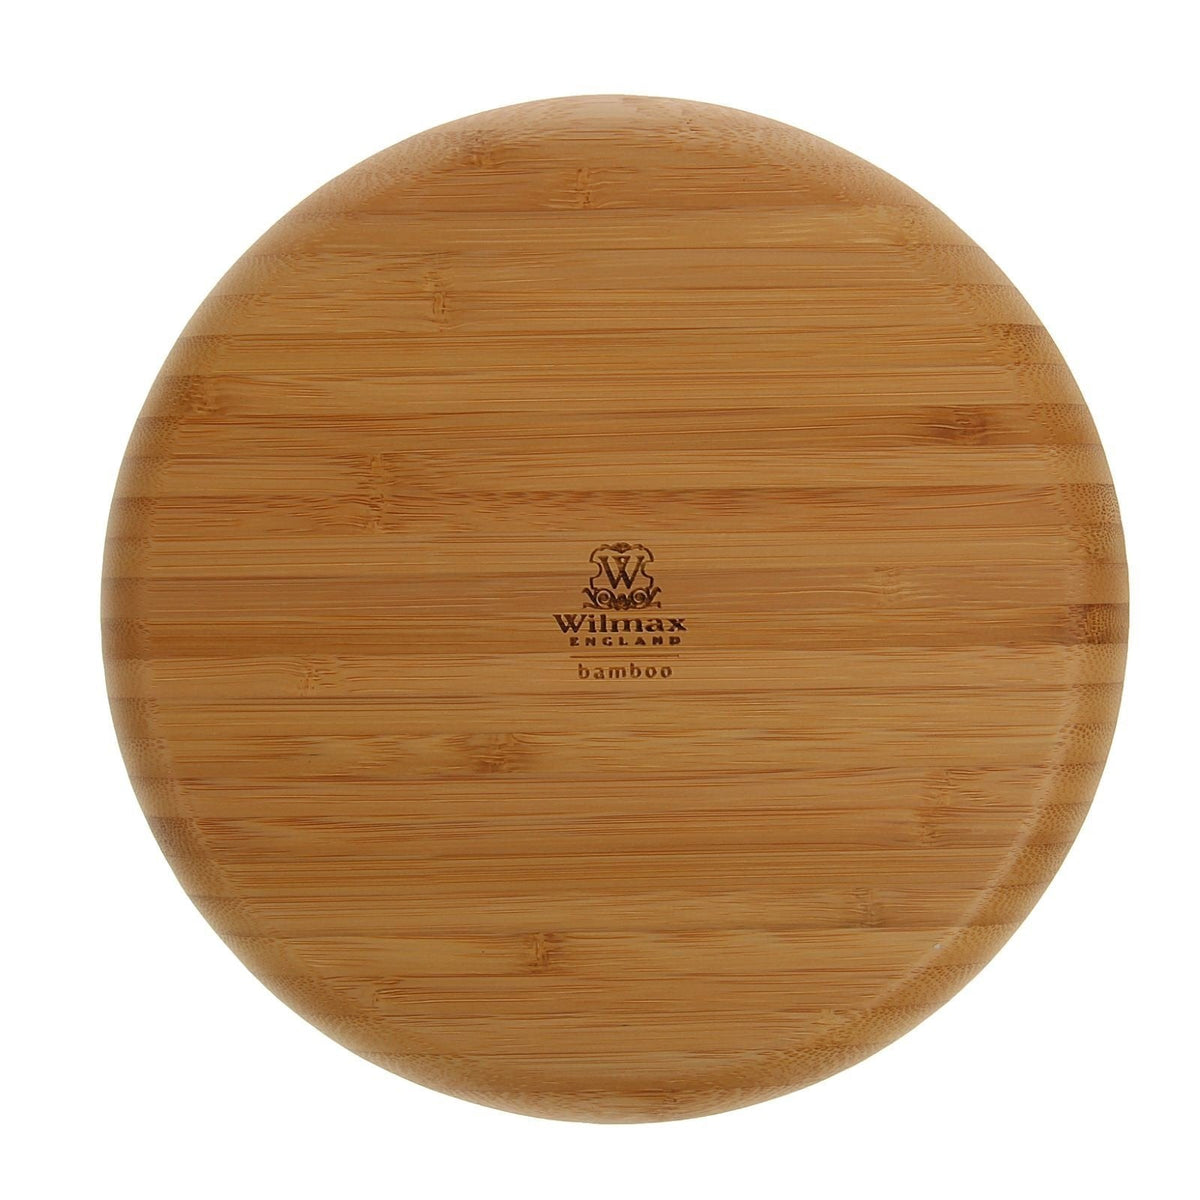 Wilmax Natural Bamboo Plate 9" | 23 Cm SKU: WL-771033/A